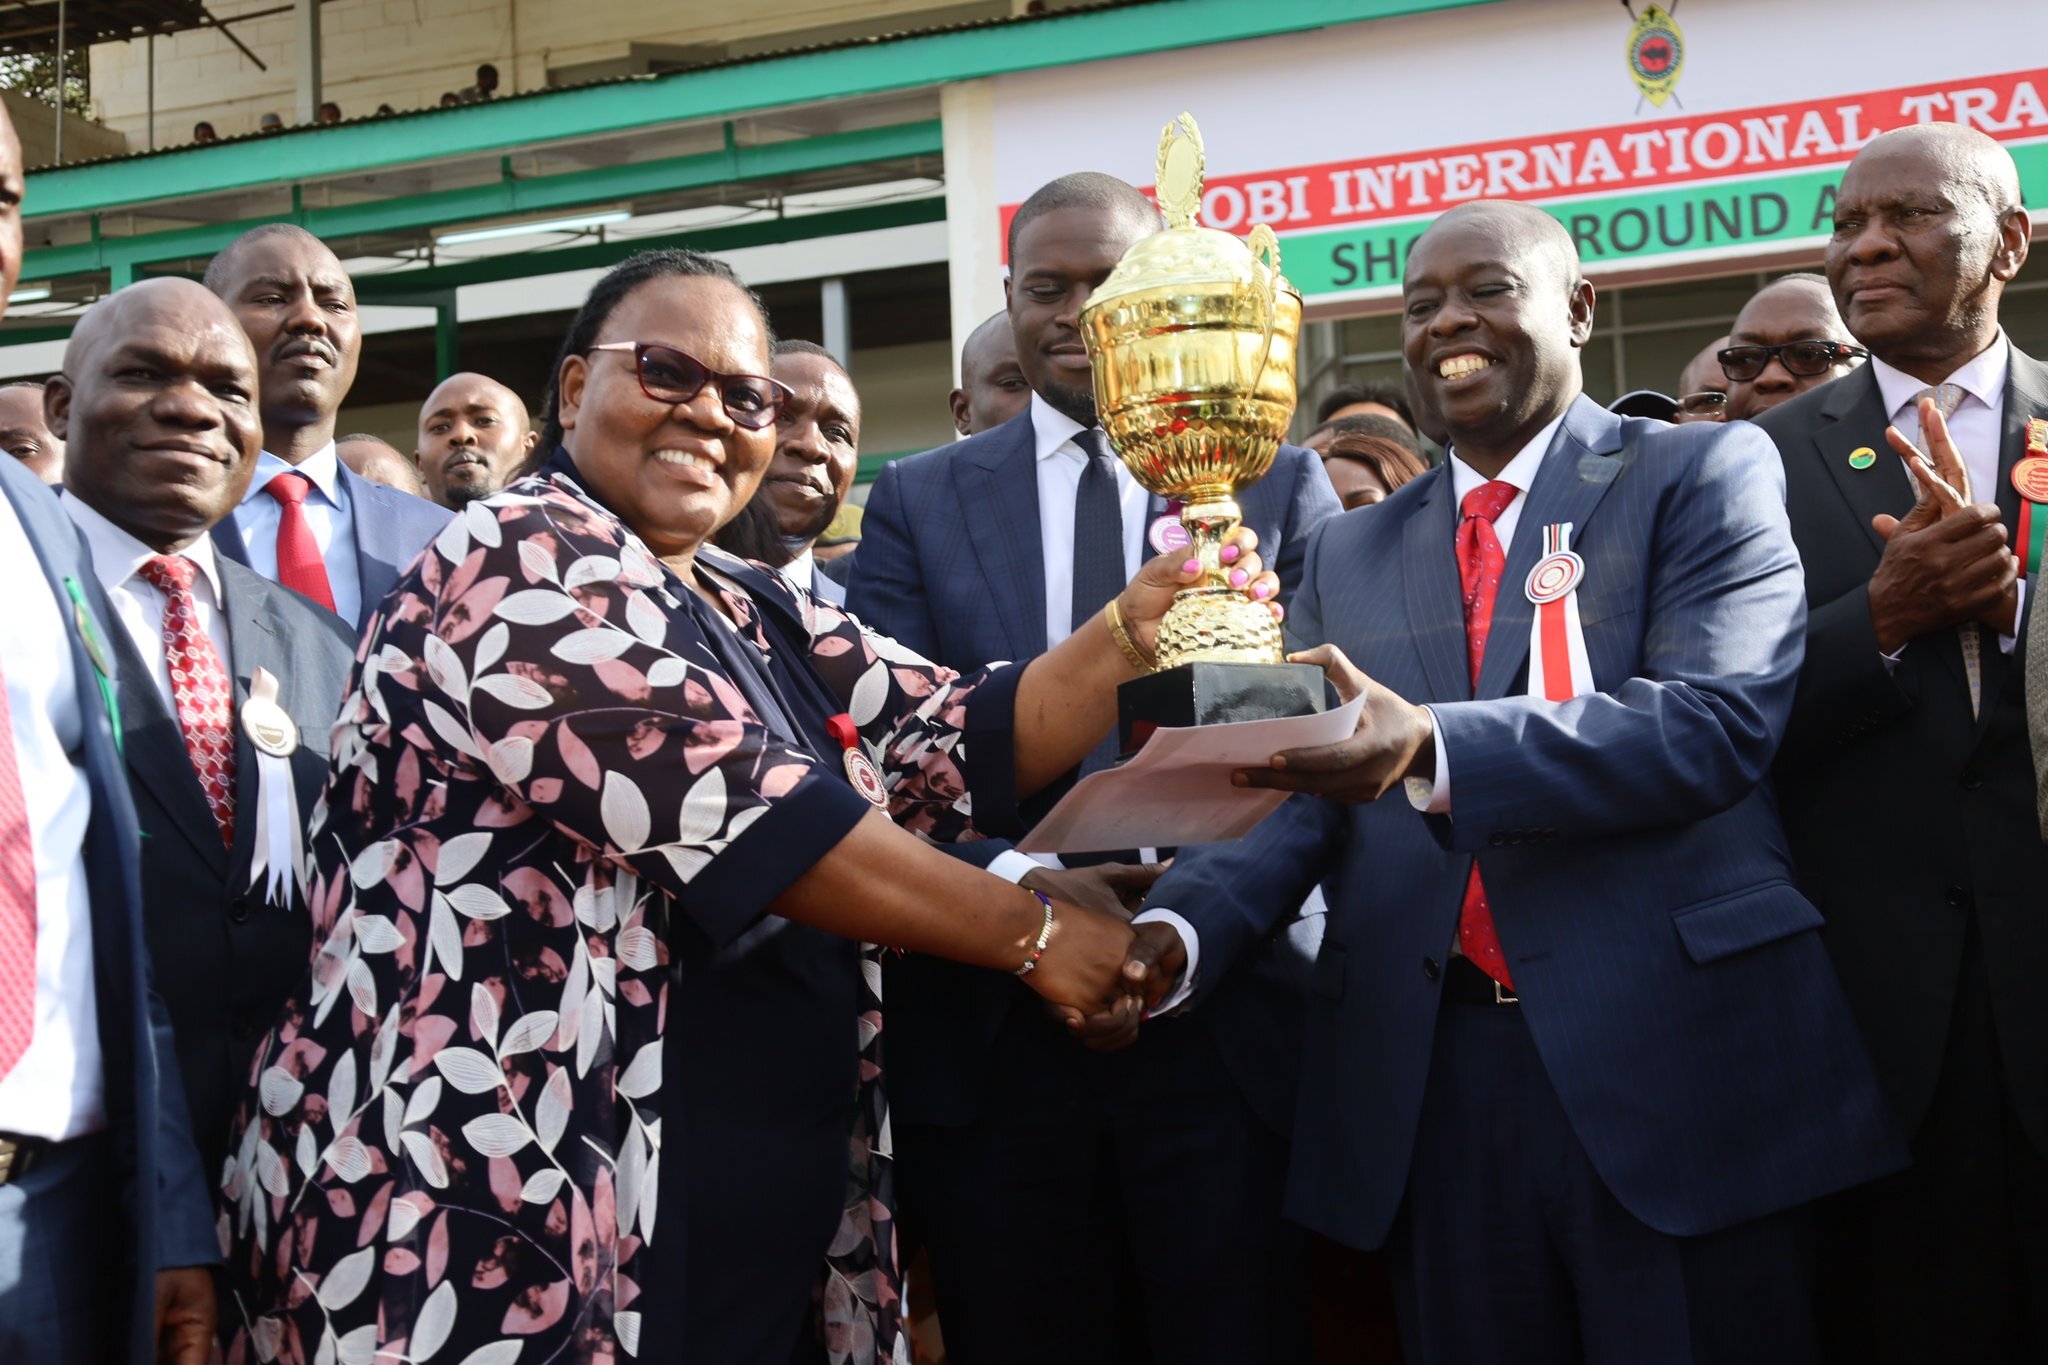 DG receiving a trophy from the DP at the MNairobi international ASK show